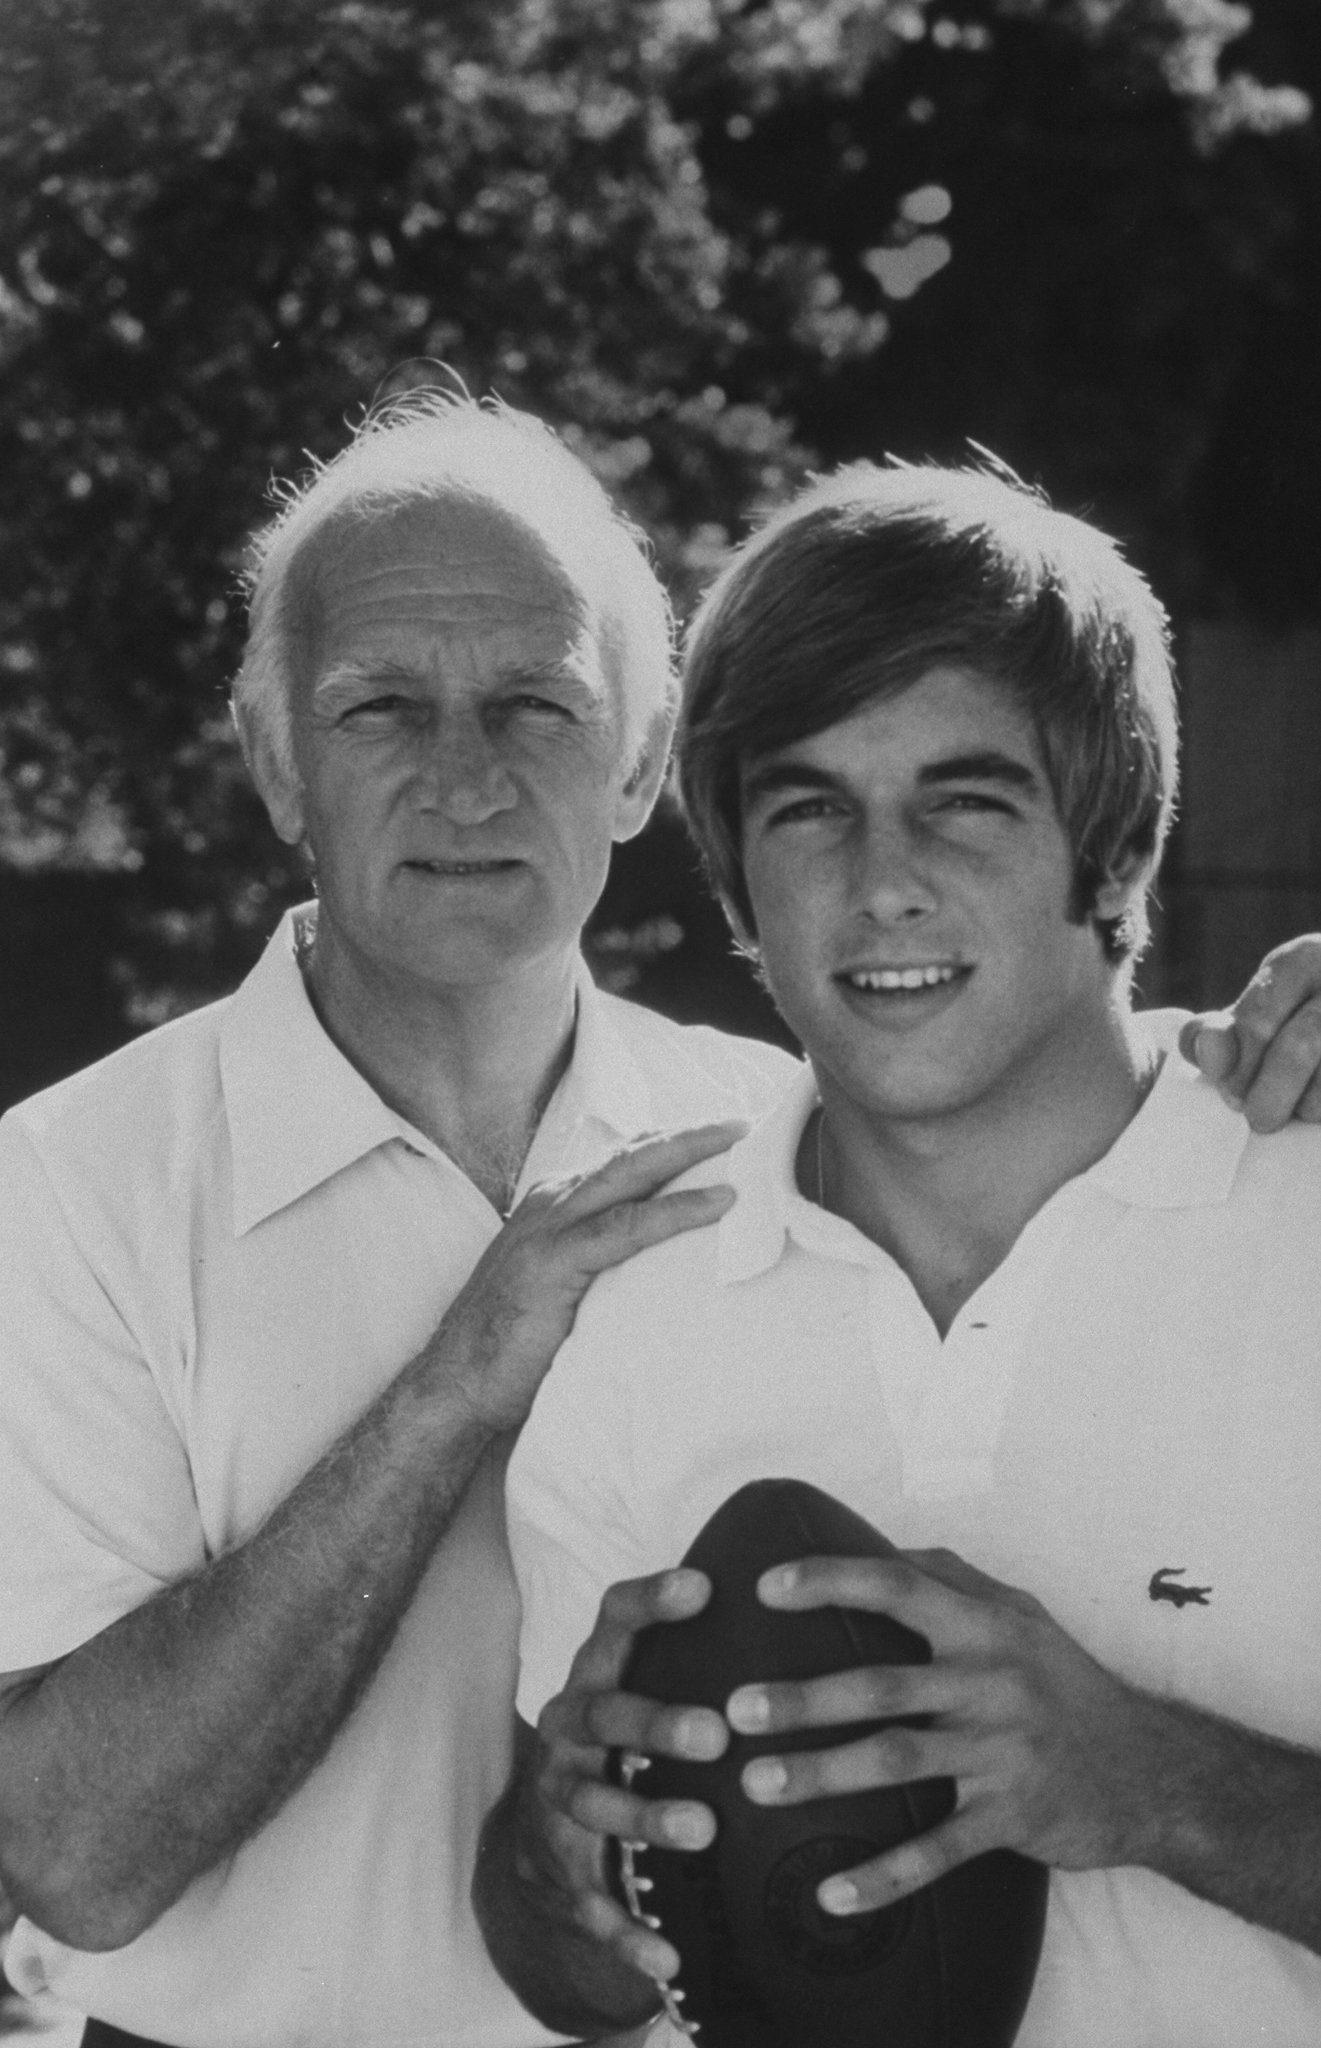 Former Michigan football superstar Tom Harmon posing with his son Mark who is U.C.L.A.'s quarterback. | Source: Getty Images